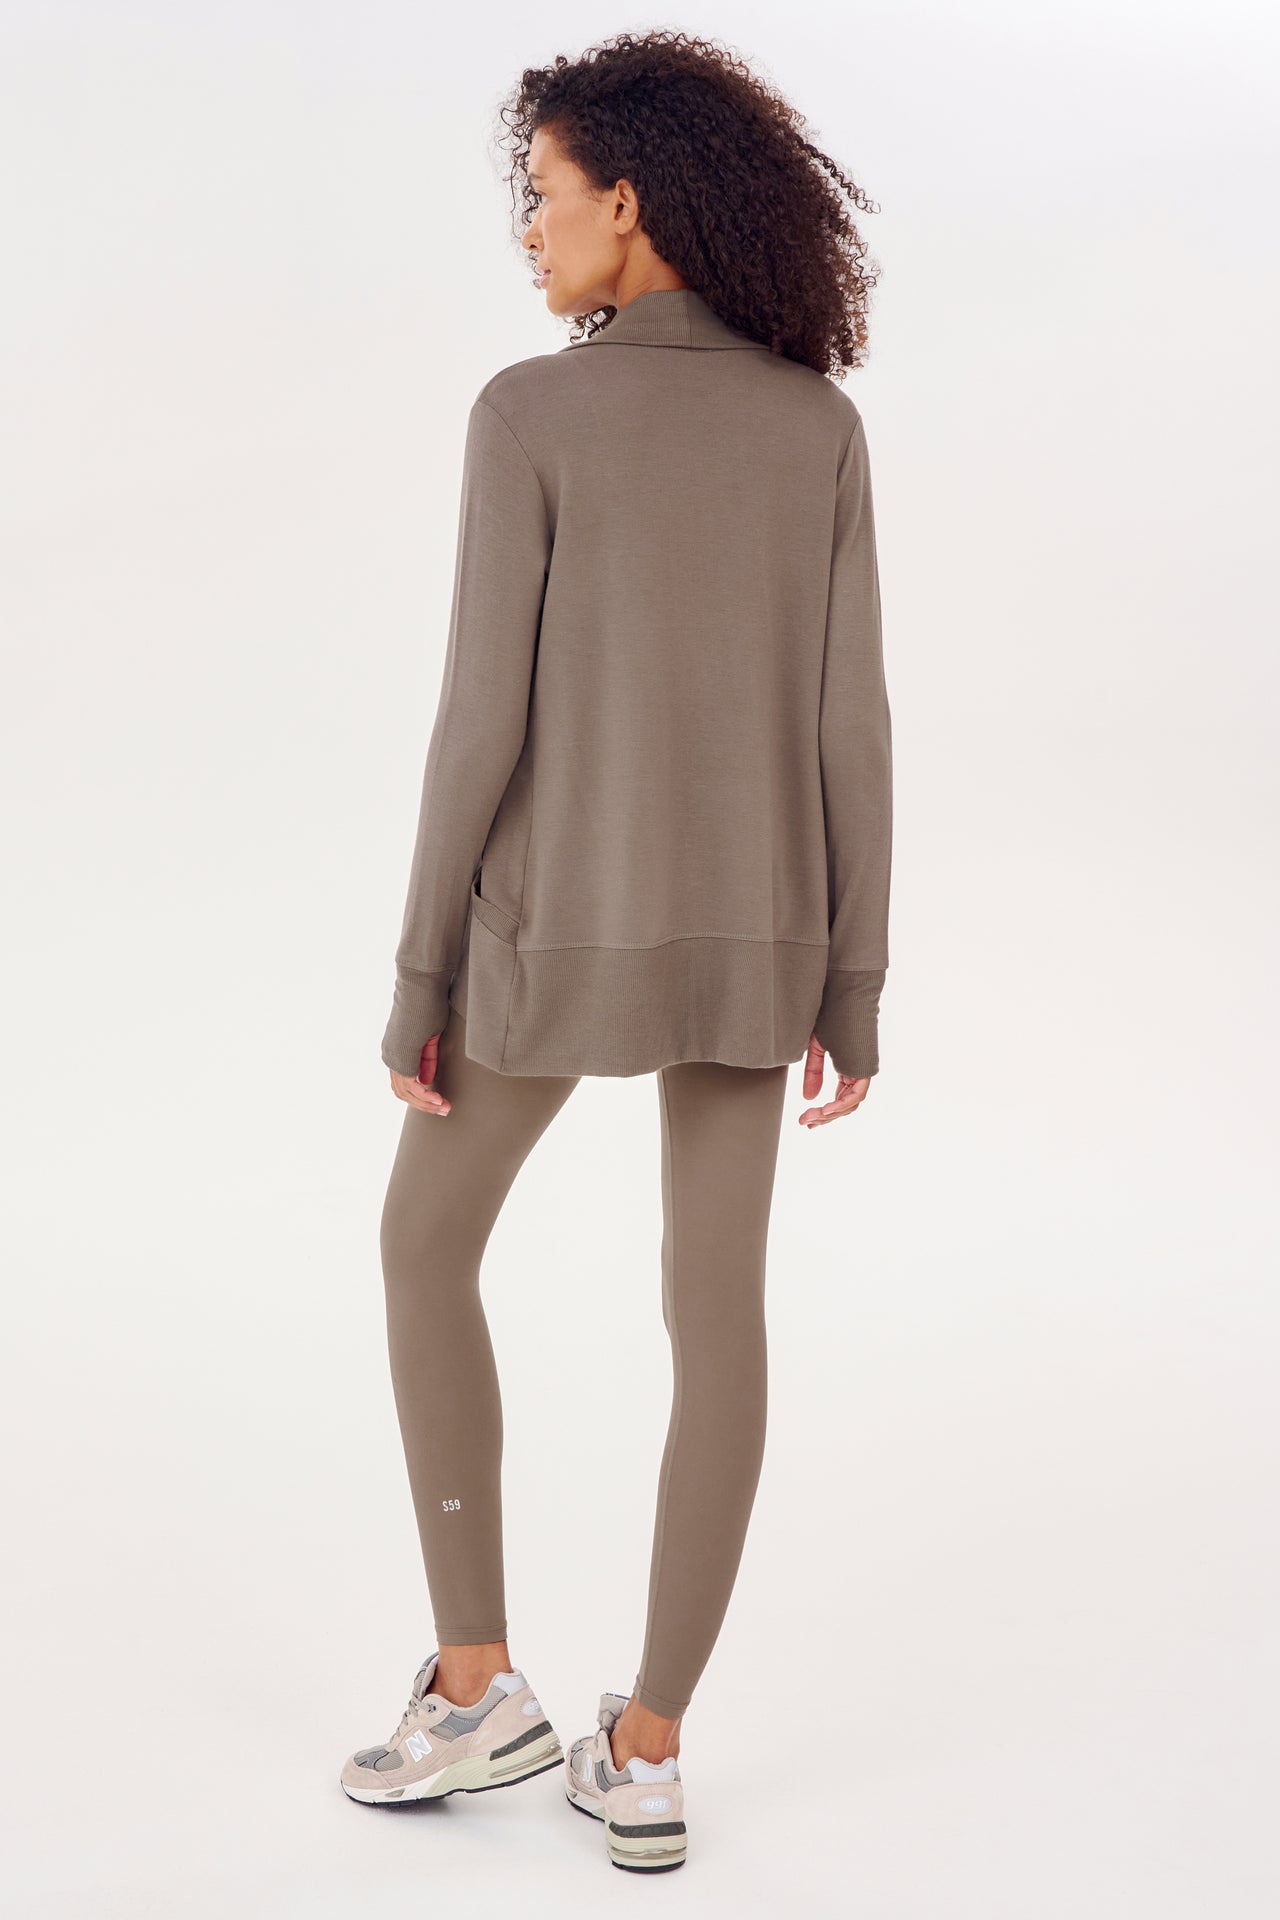 The back view of a woman wearing a SPLITS59 Celine Fleece Cardigan - Lentil with thumbhole sleeves and leggings, both made in Los Angeles.